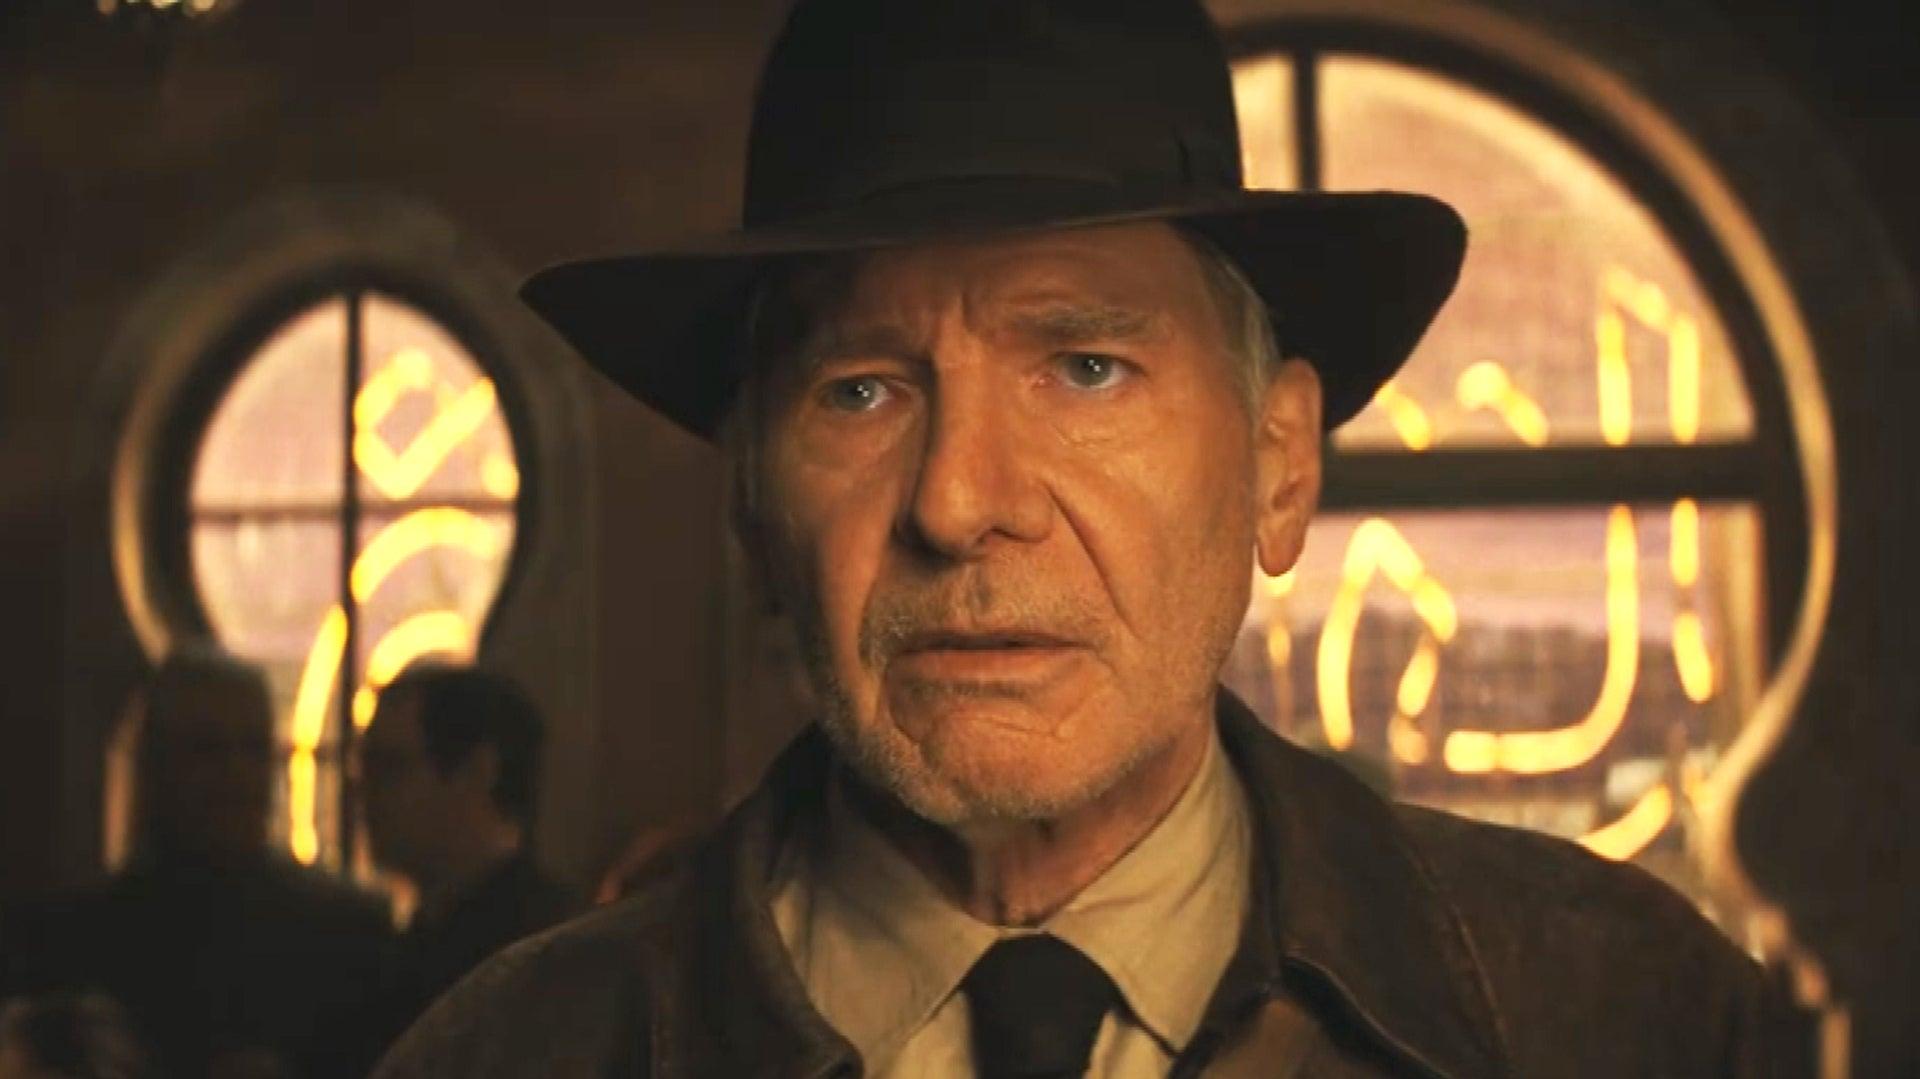 free-download-indiana-jones-and-the-dial-of-destiny-teaser-trailer-released-1920x1080-for-your